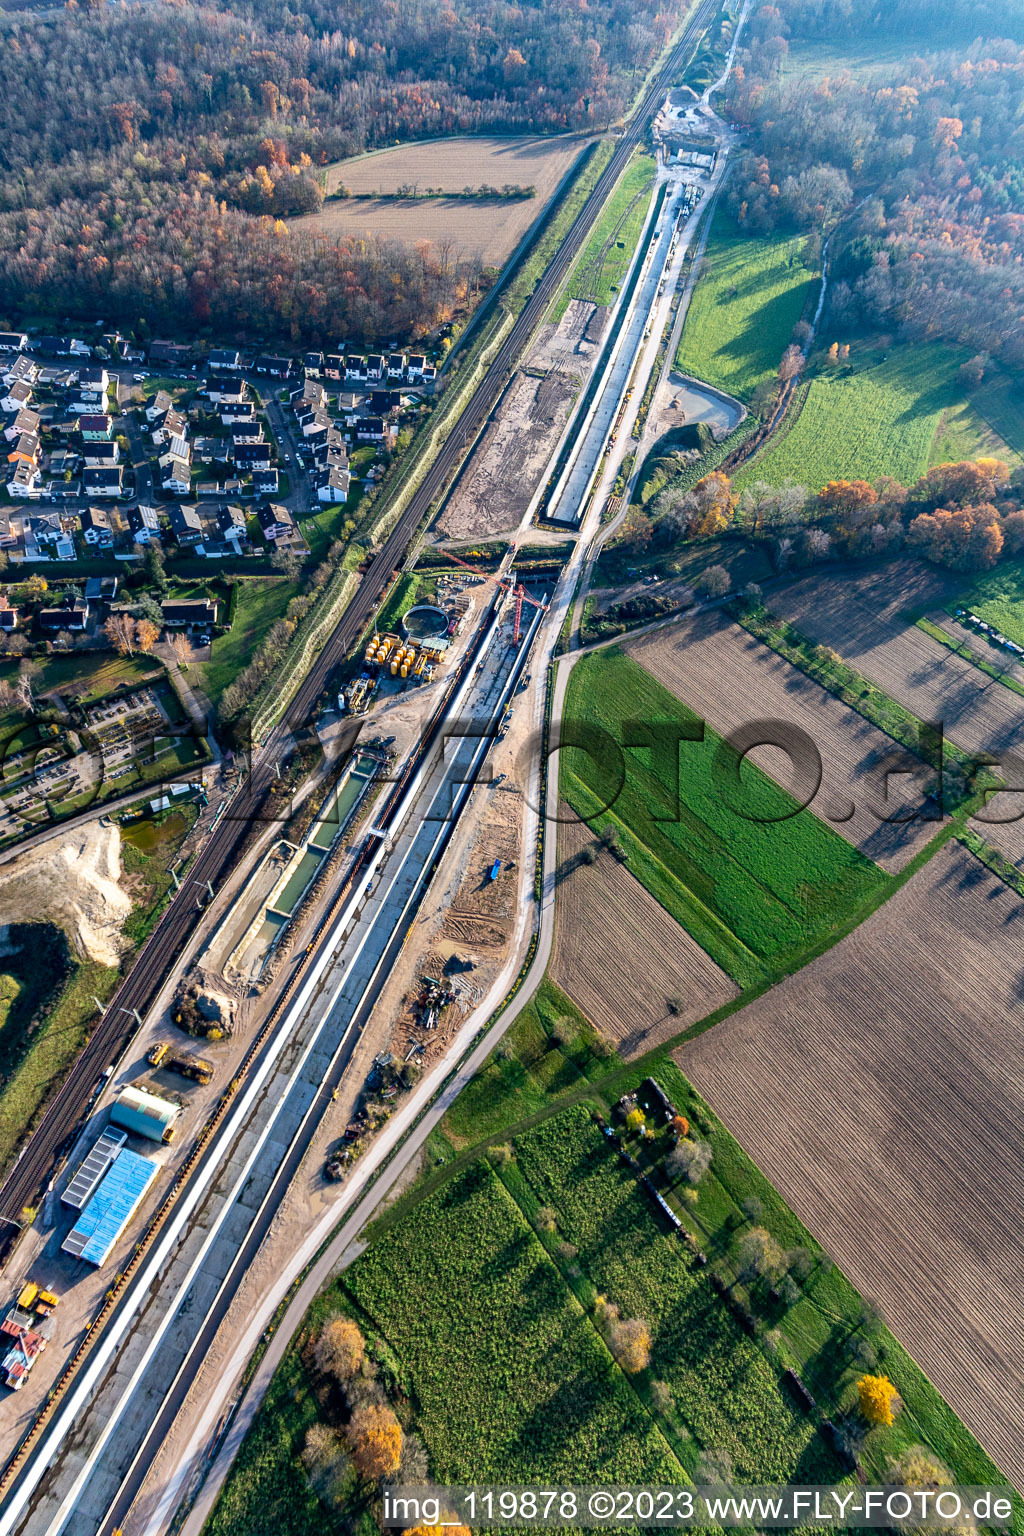 Aerial view of Construtcion work on a rail tunnel track in the route network of the Deutsche Bahn in Rastatt in the state Baden-Wurttemberg, Germany